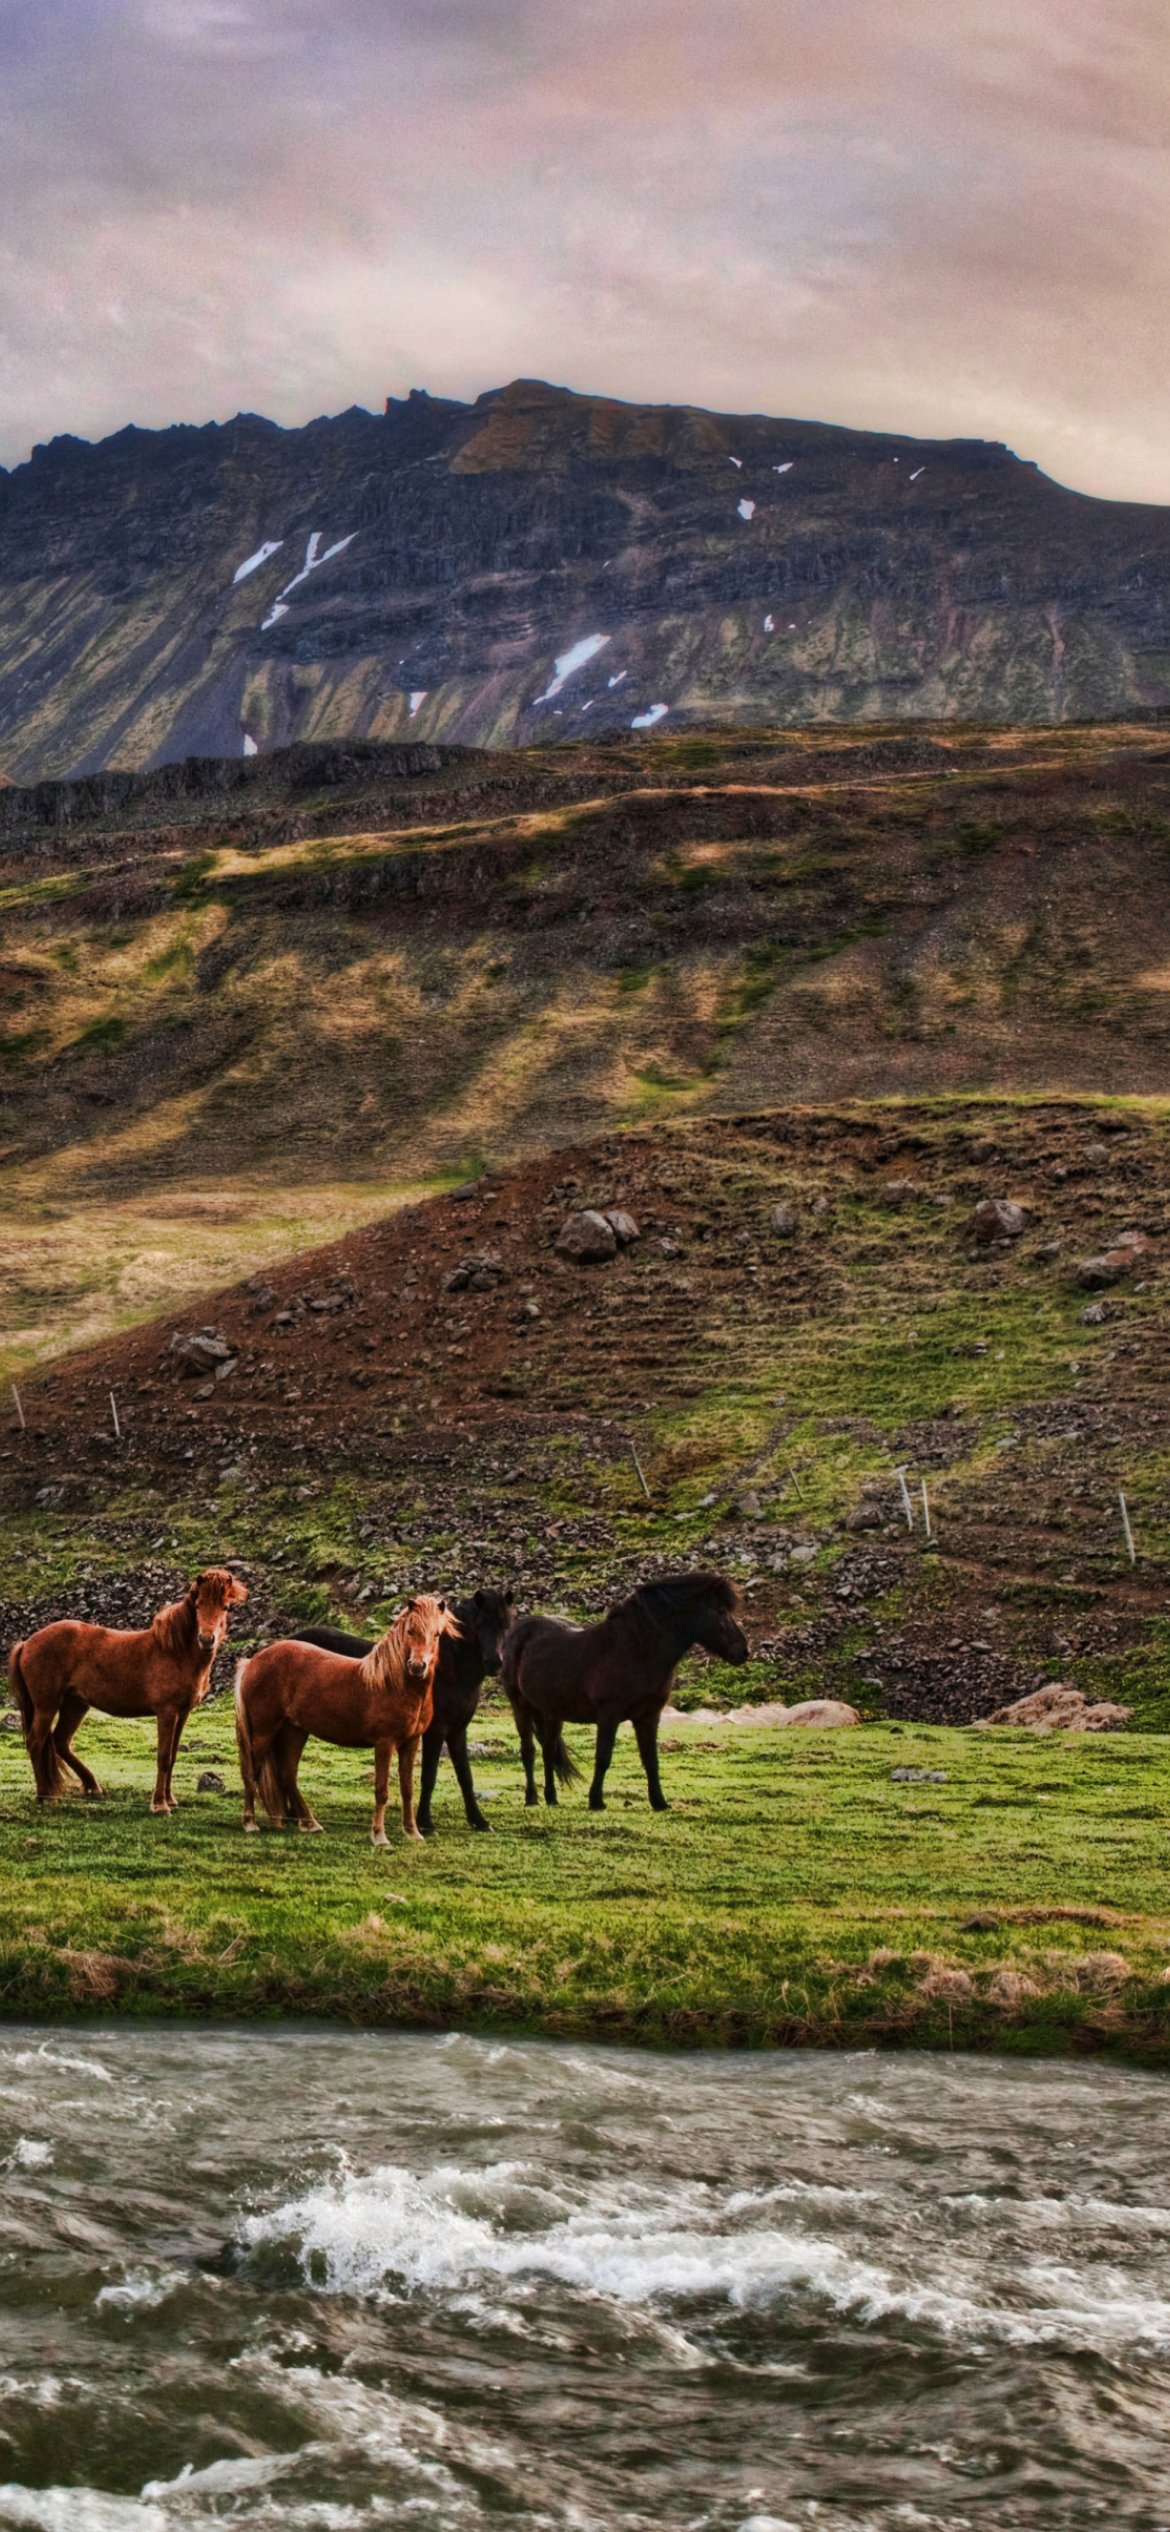 Landscape In Iceland And Horses wallpaper 1170x2532